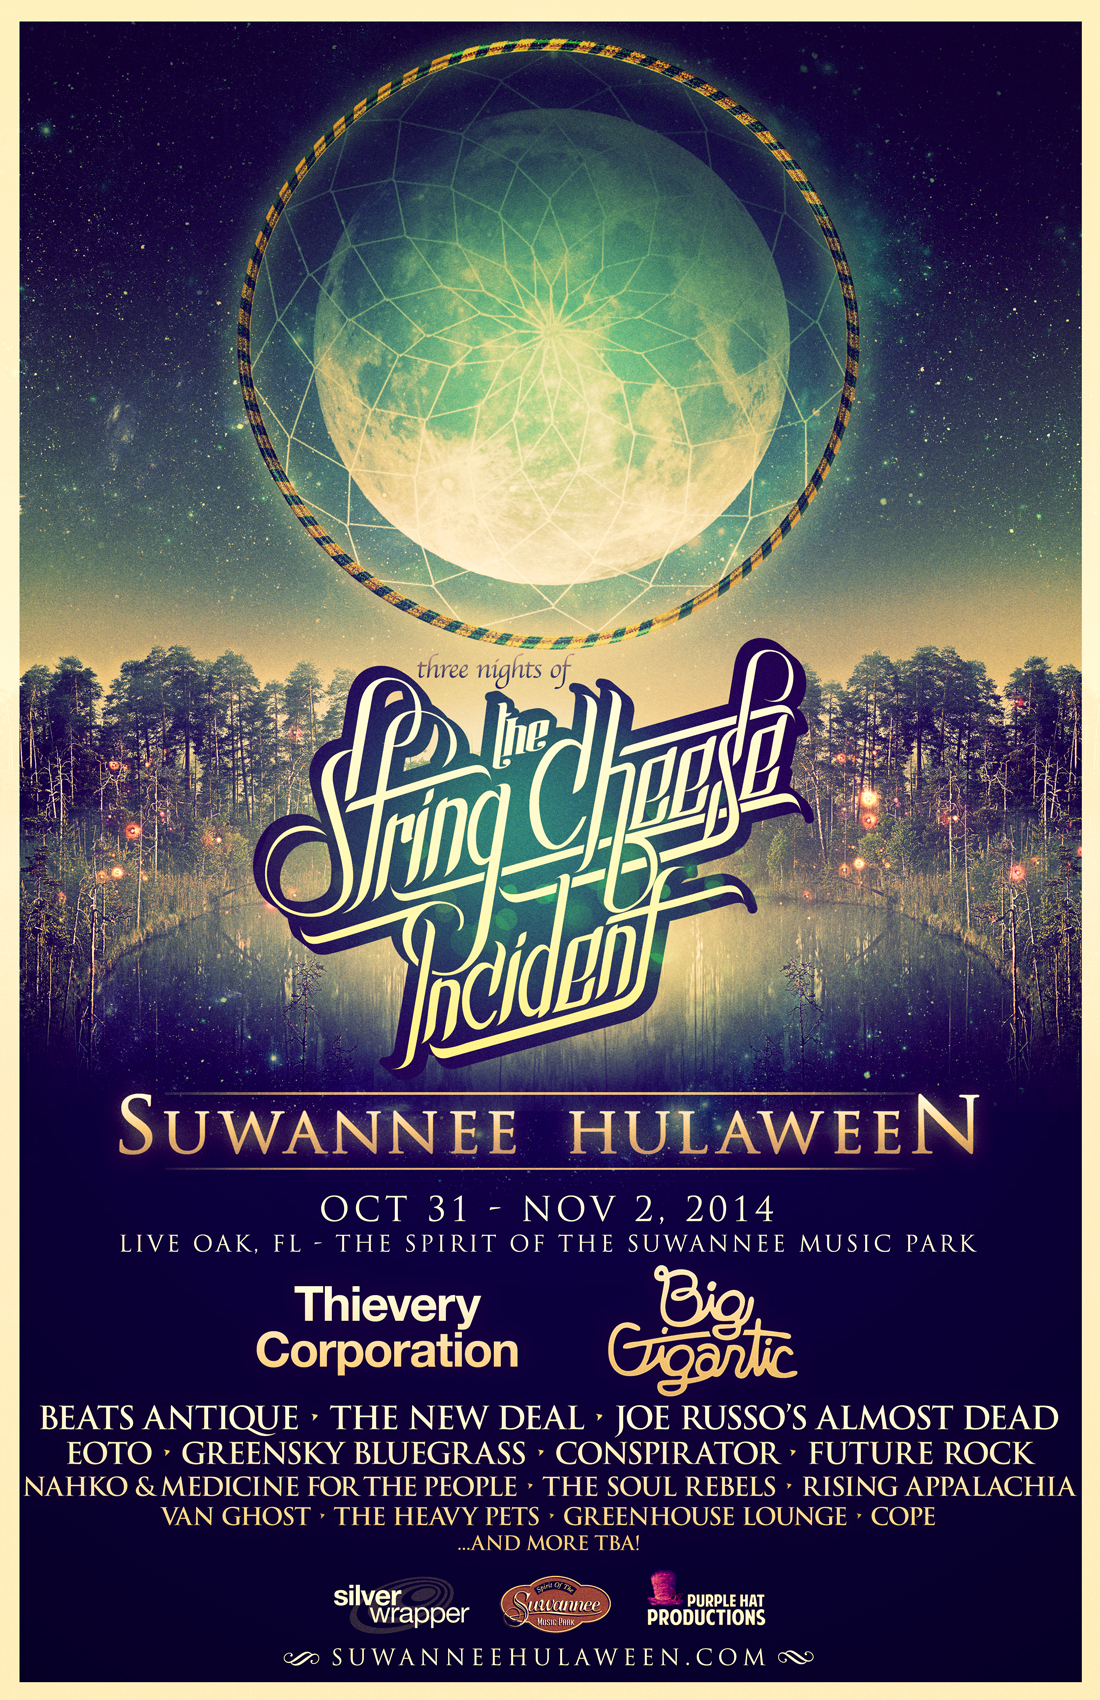 INITIAL LINE UP IS UNVEILED FOR THE SECOND ANNUAL STRING CHEESE INCIDENT SUWANNEE HULAWEEEN